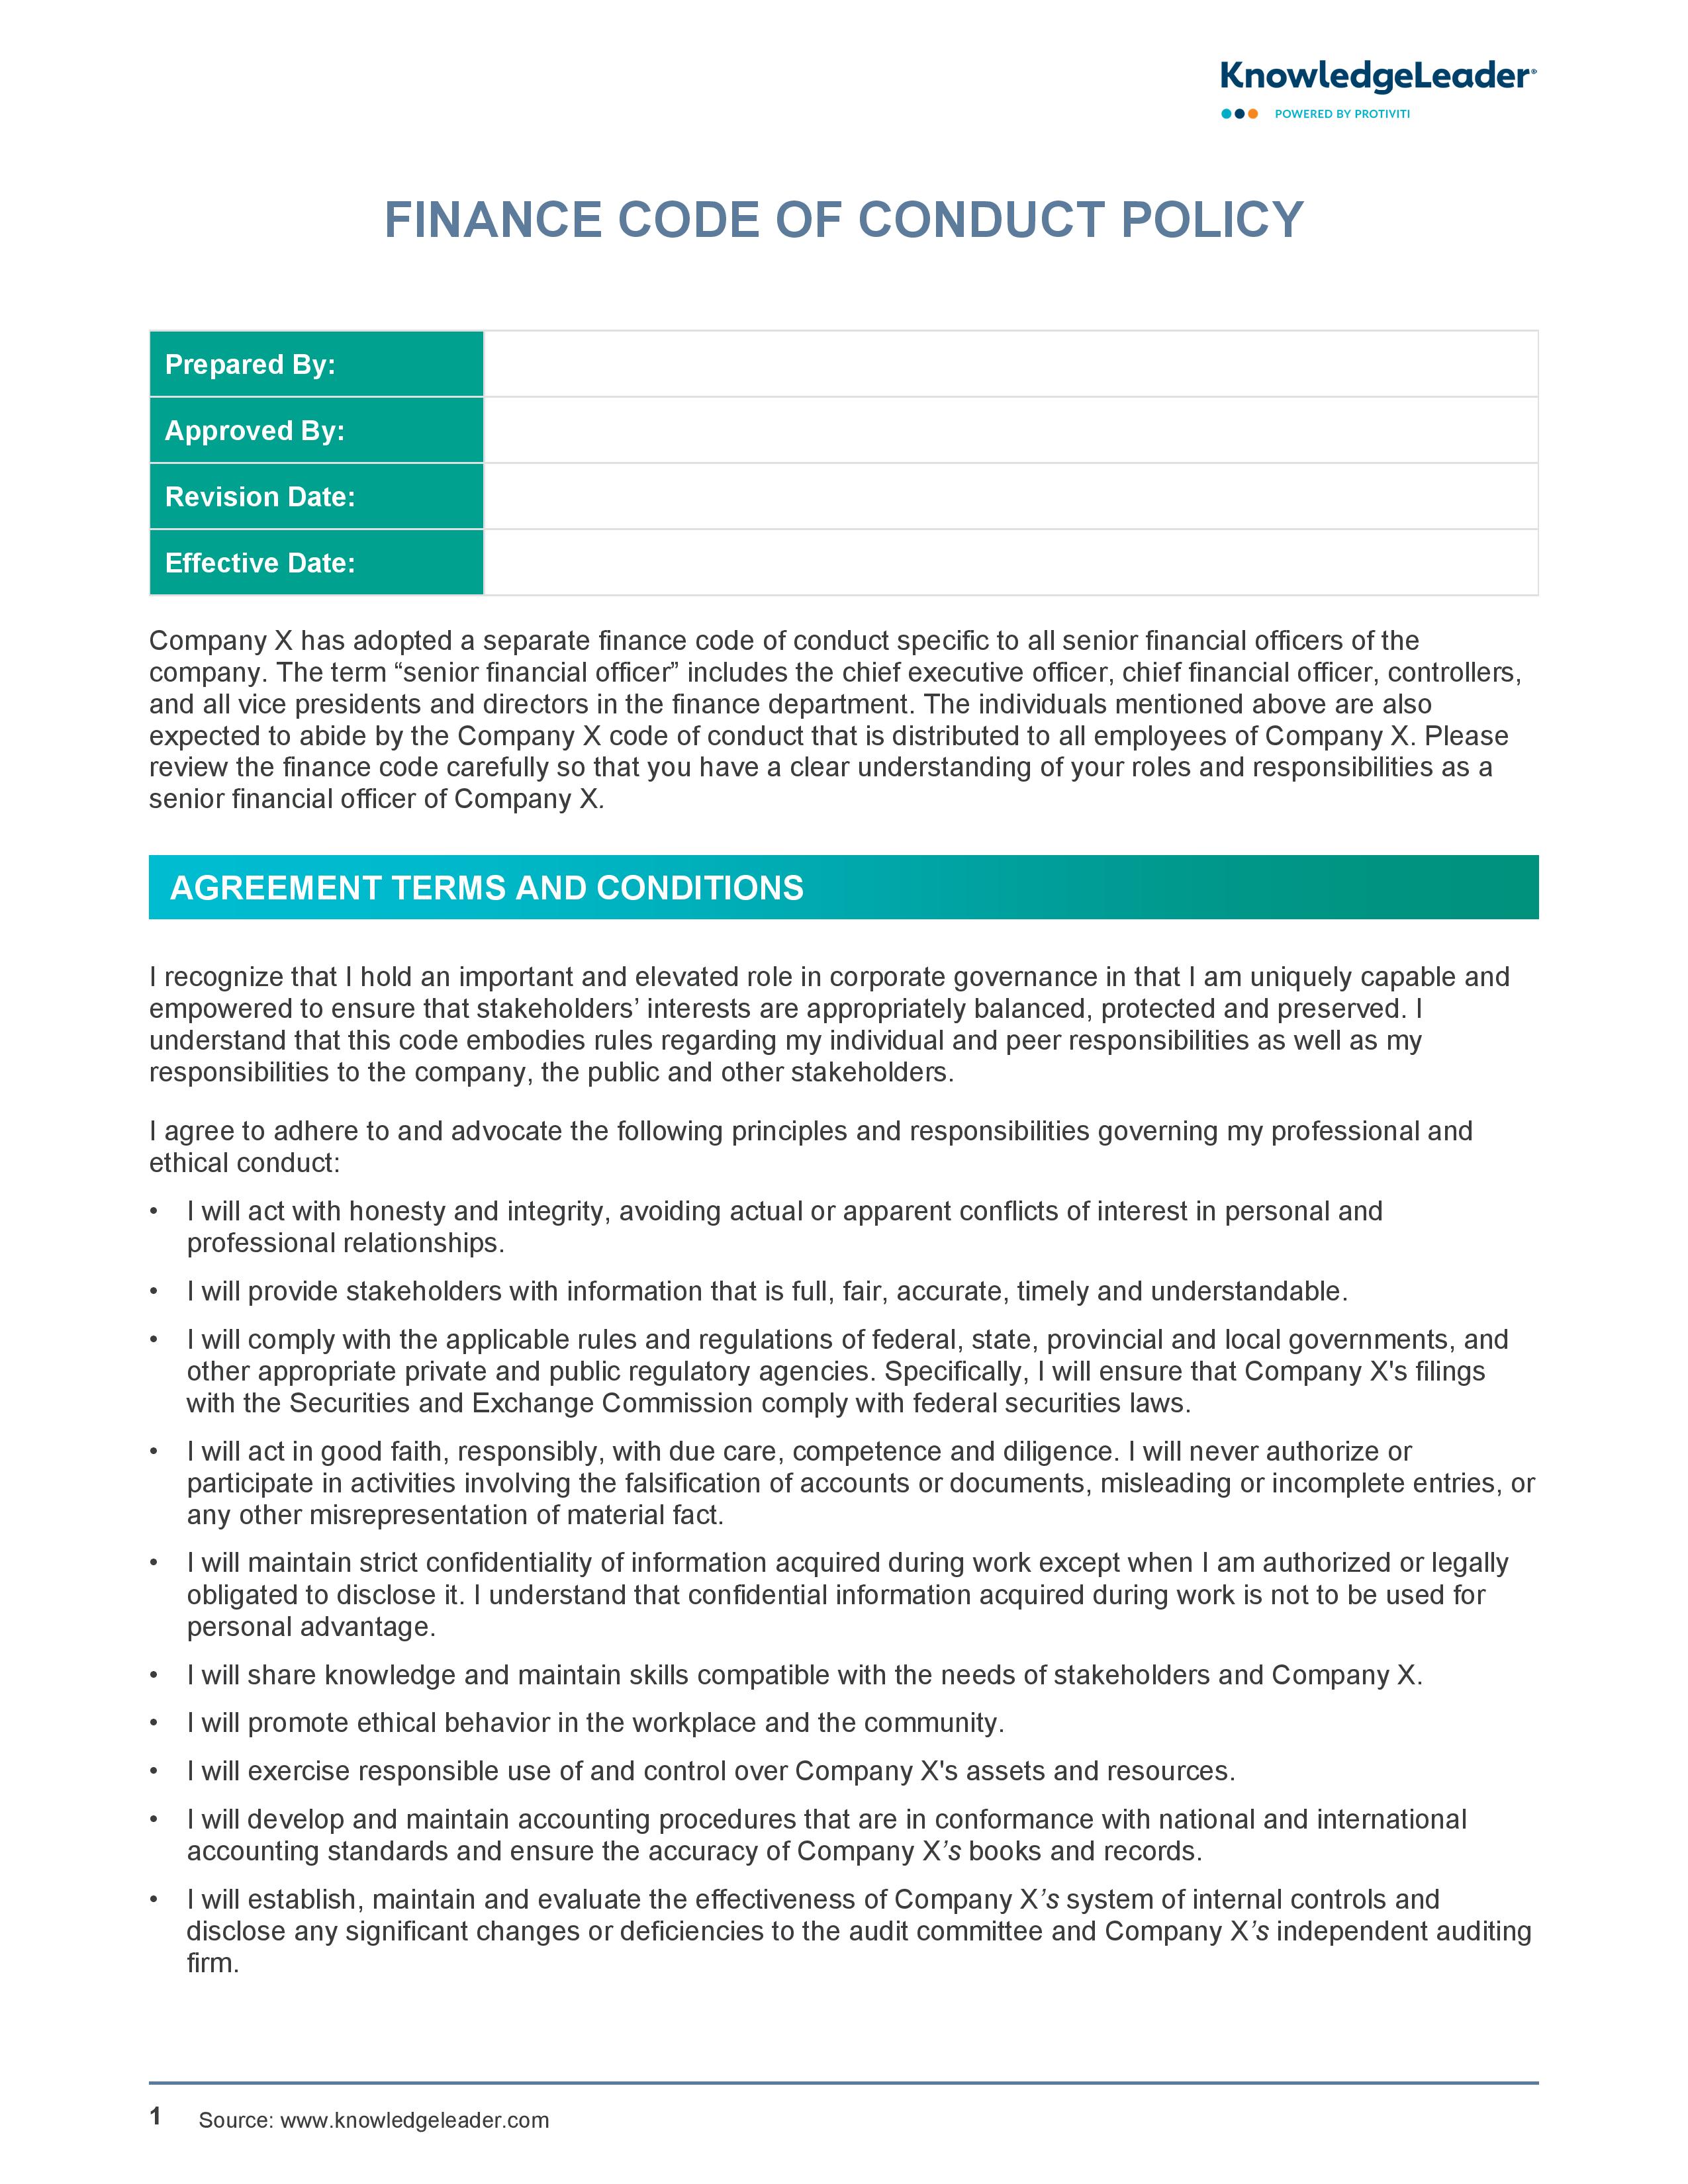 Screenshot of the first page of Finance Code of Conduct Policy